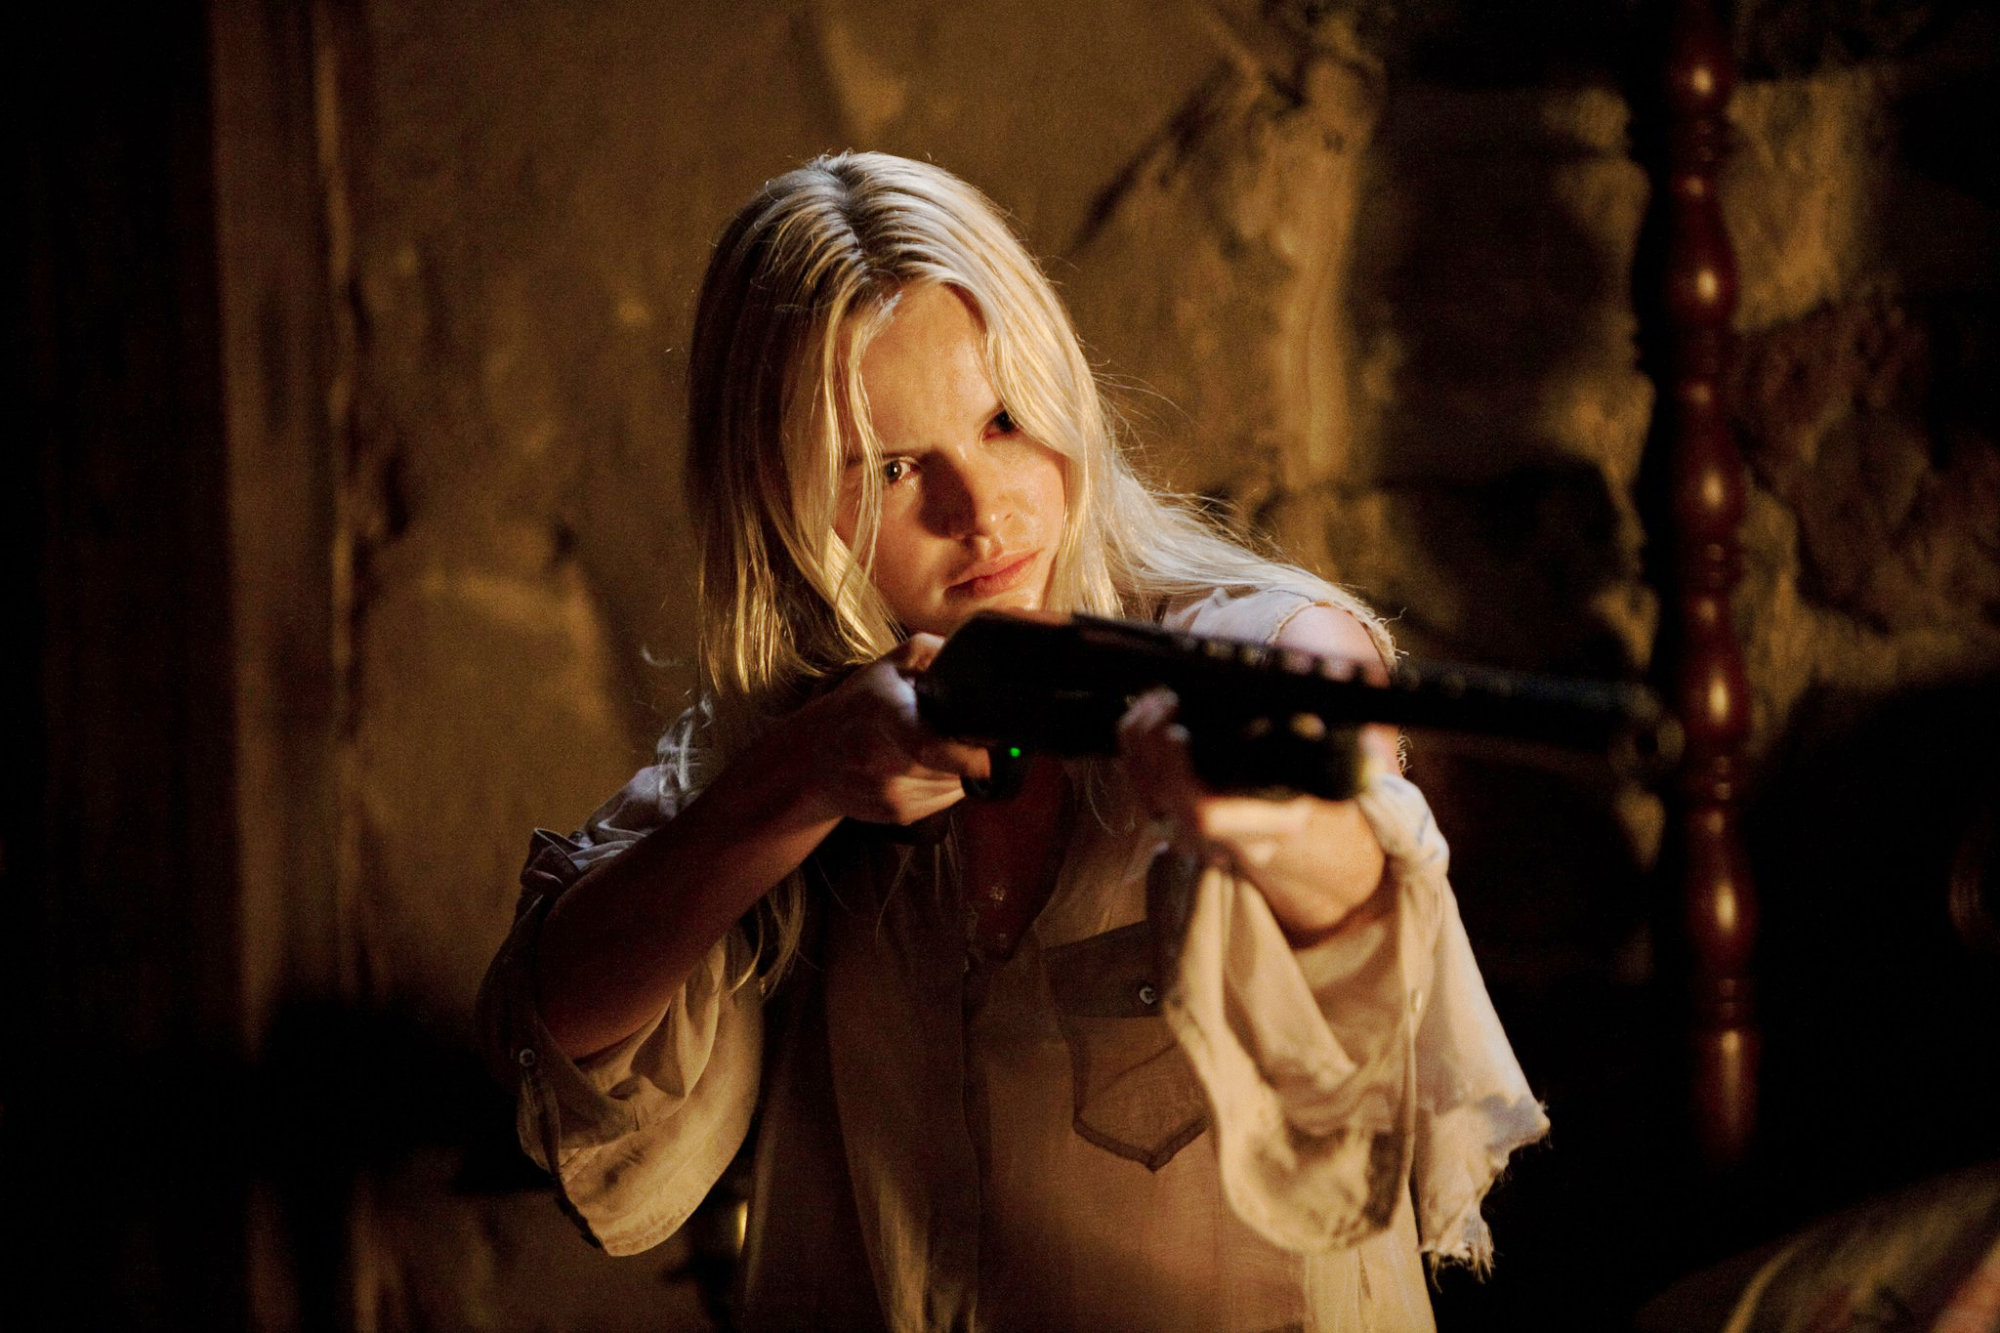 Kate Bosworth stars as Amy Sumner in Screen Gems' Straw Dogs (2011). Photo by: Steve Dietl.